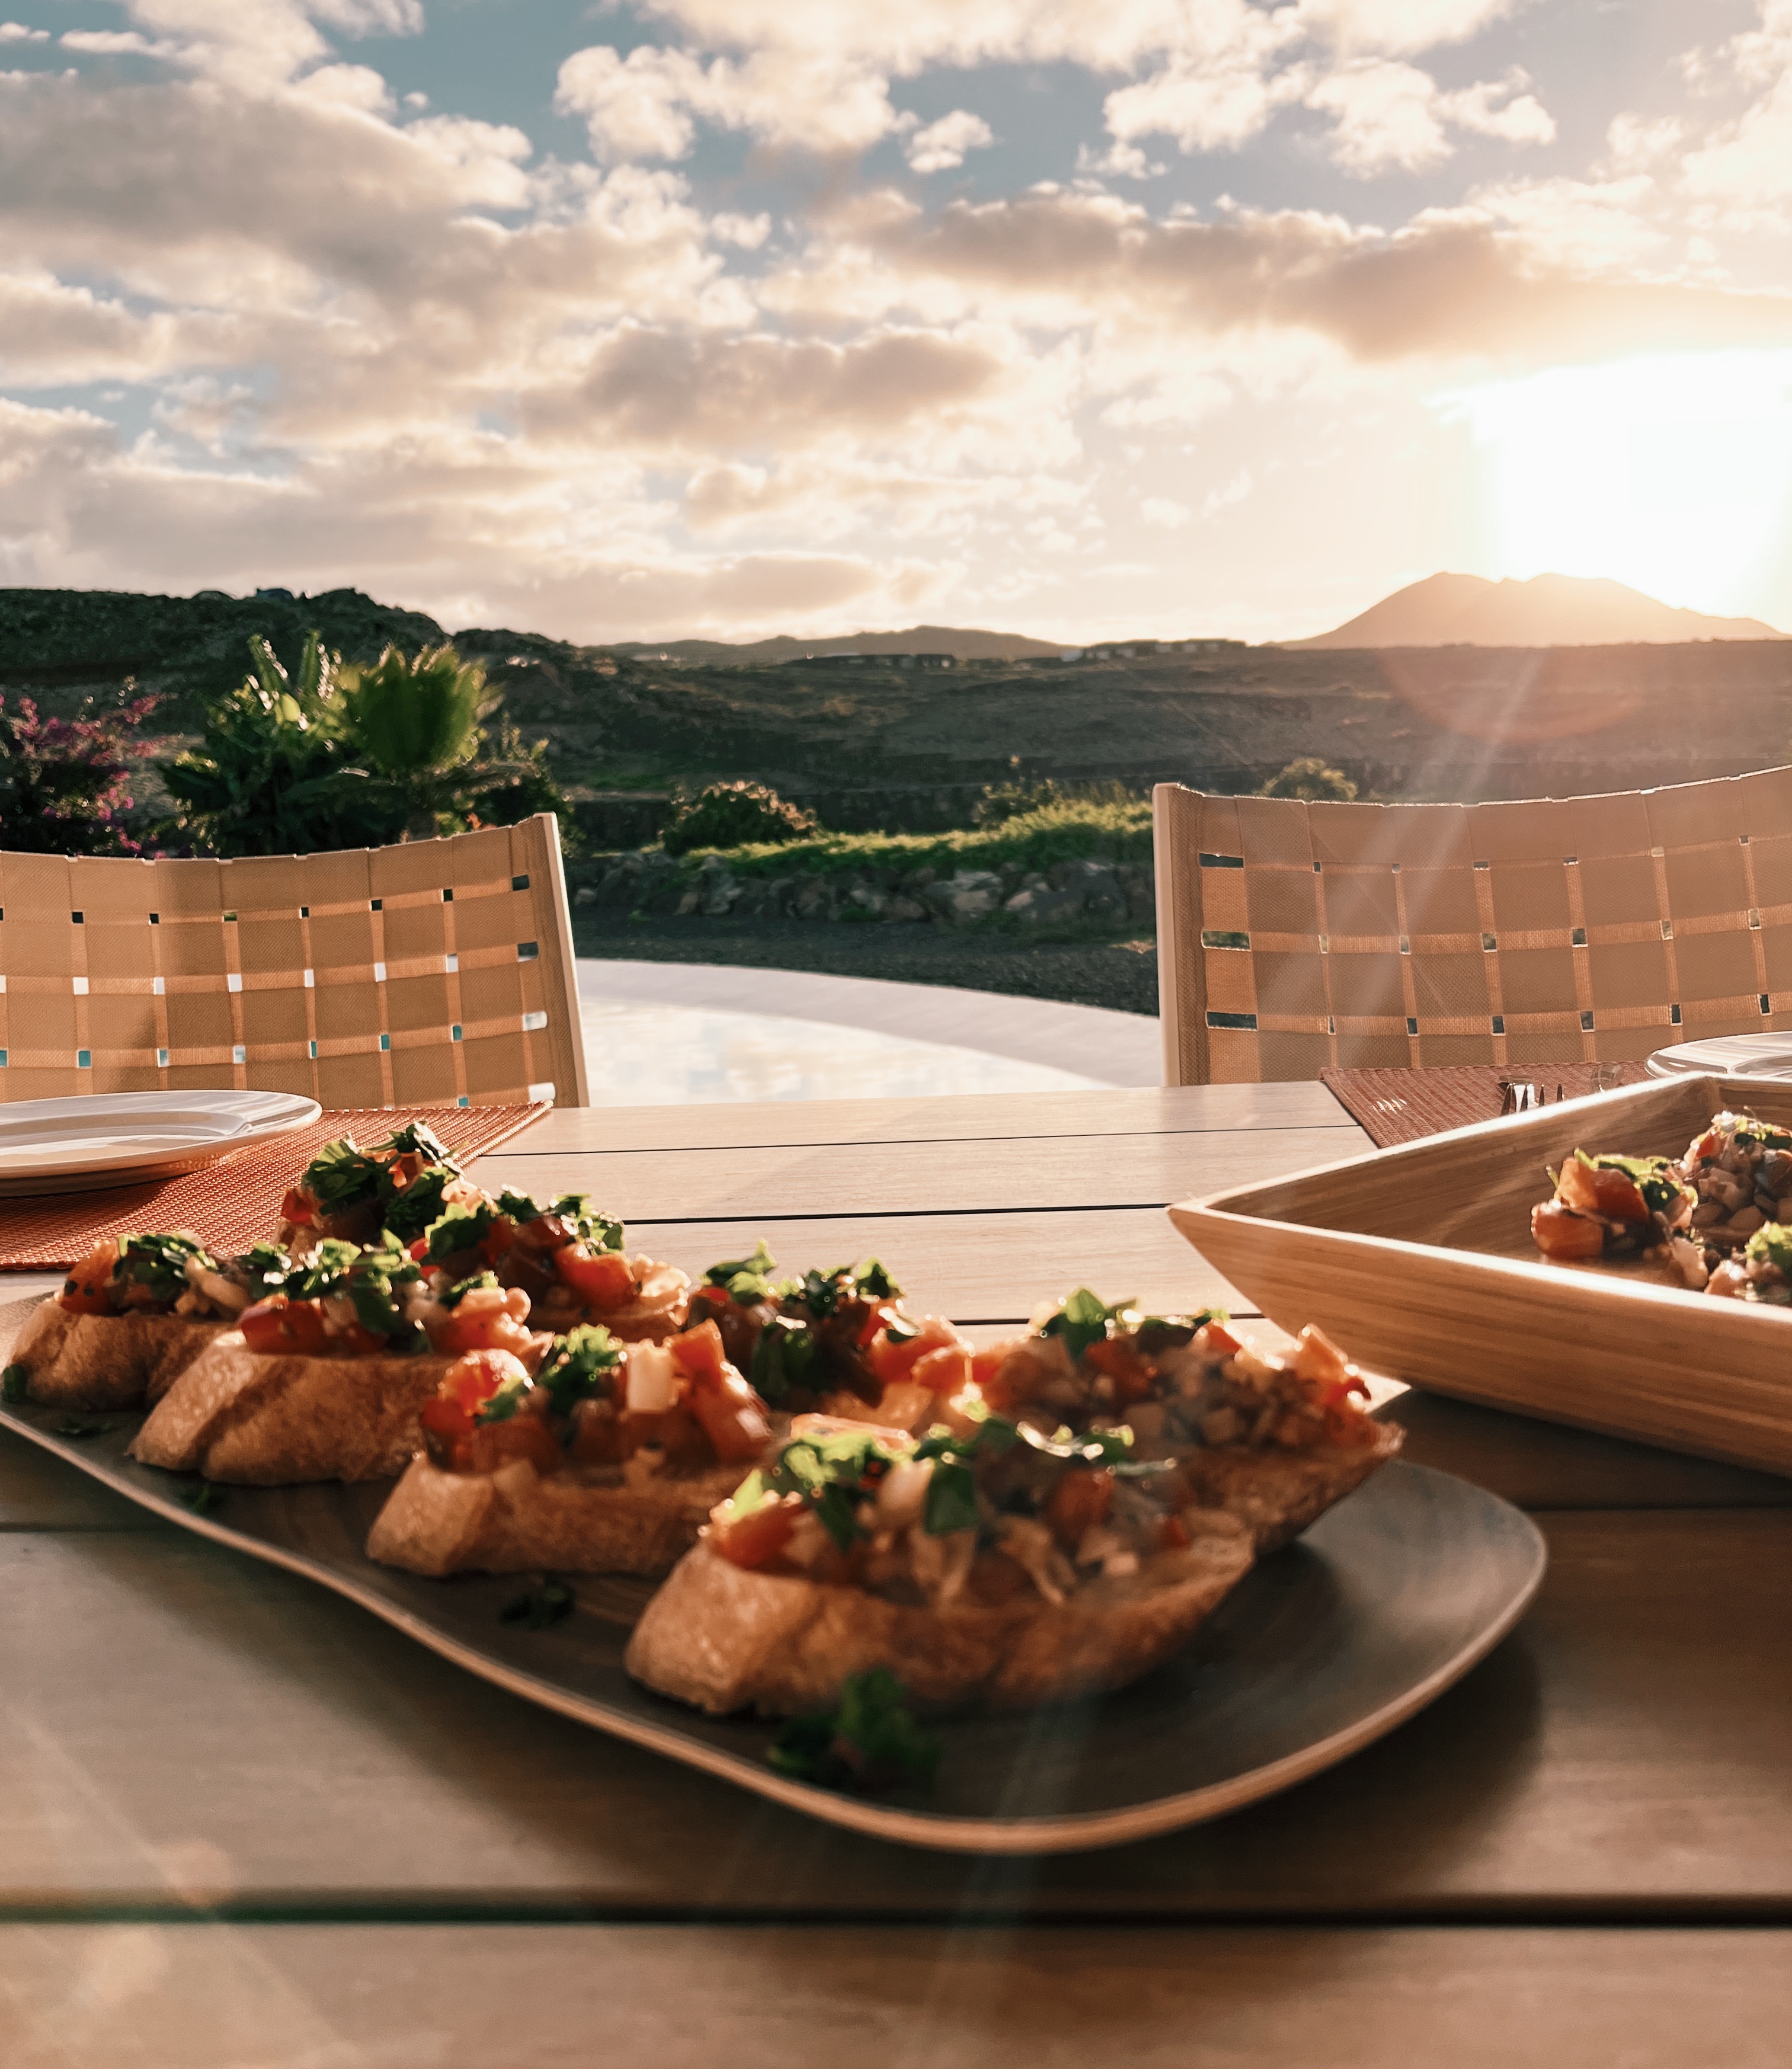 Bruschetta on large plate on a wooden table in front of sun setting over a small mountain in the distance on Fuerteventura, Spain